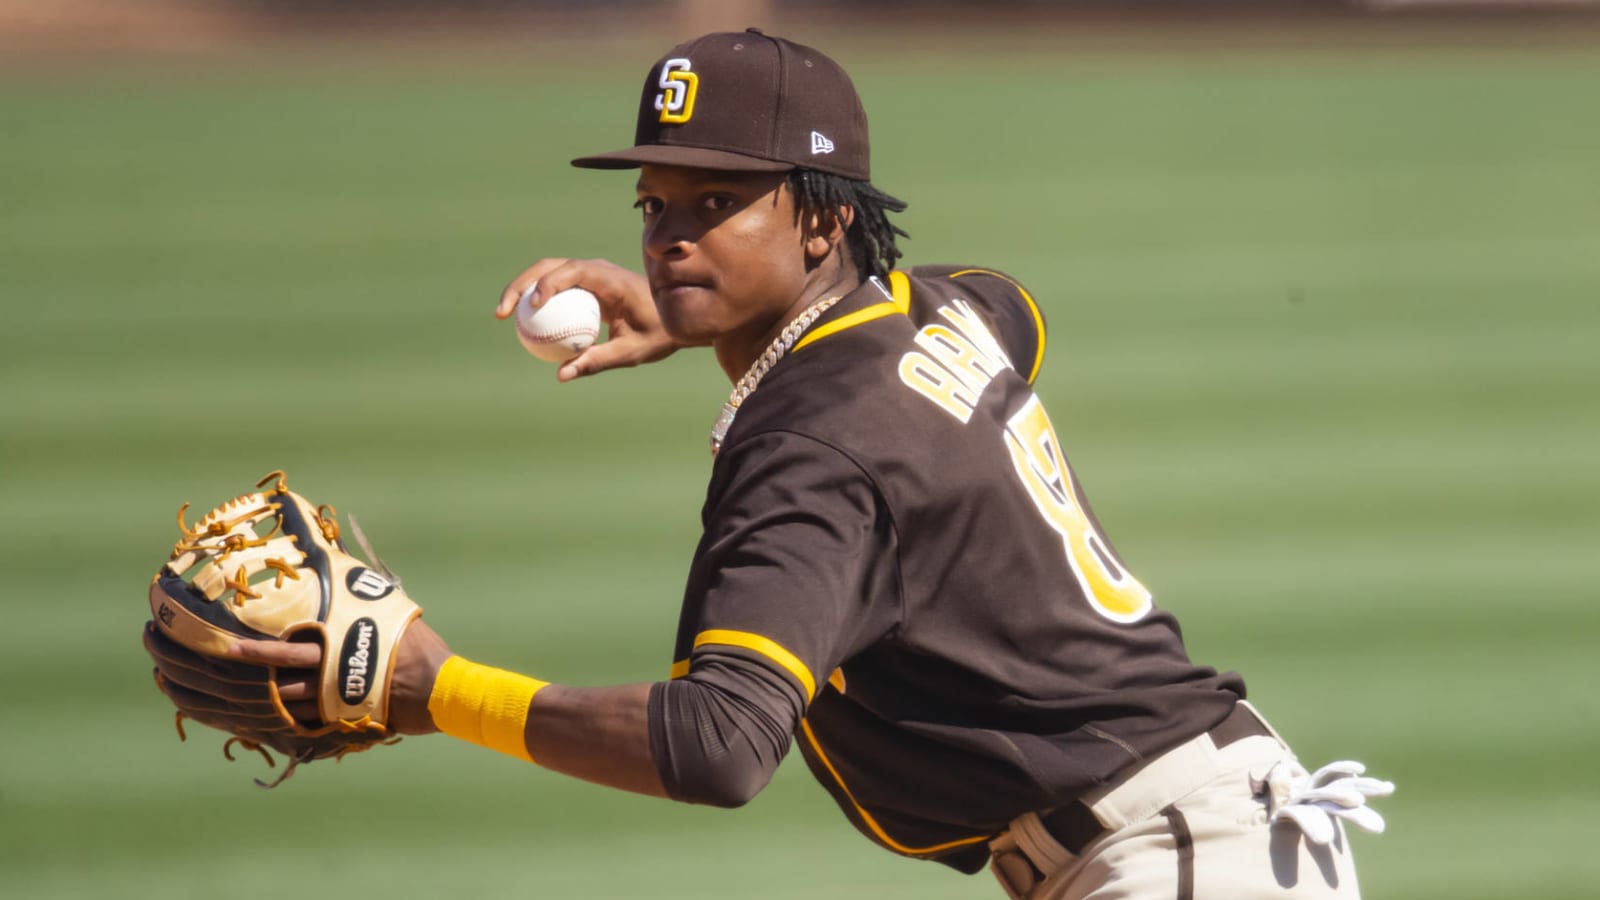 Touted Padres prospect Abrams out for season with fractured tibia